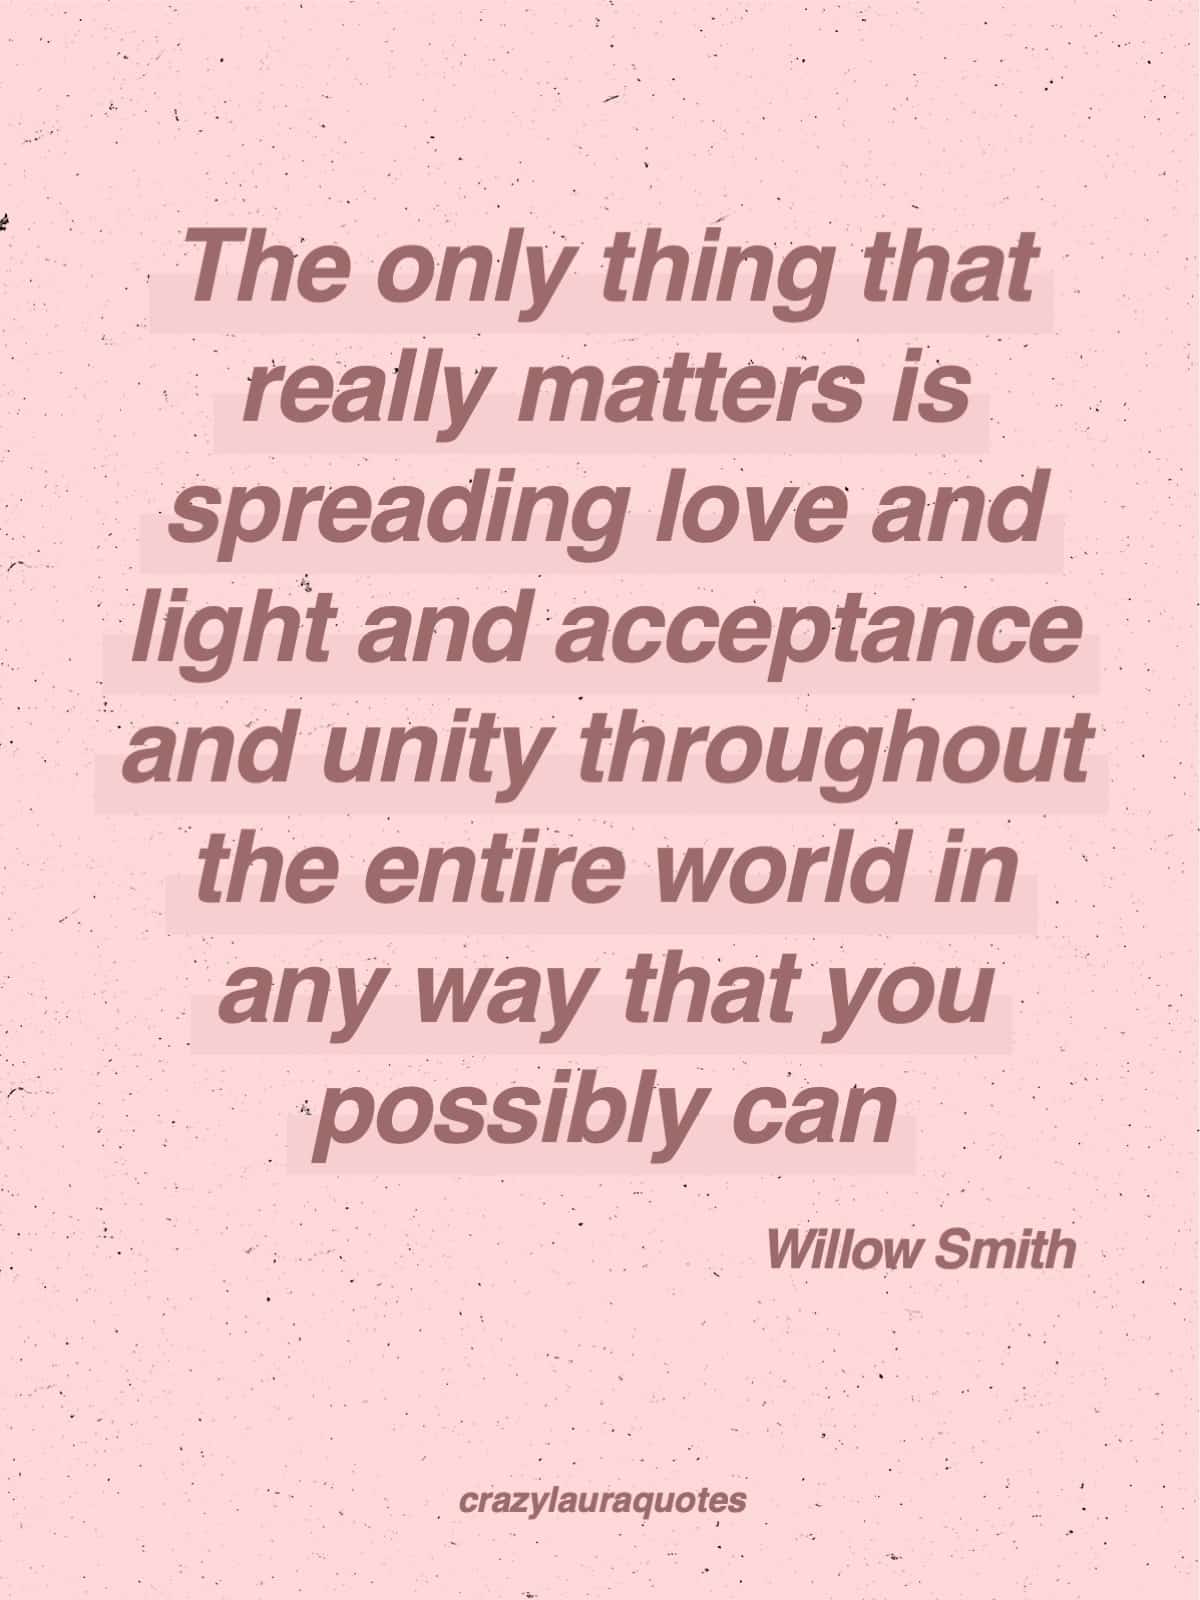 love and unity for the world willow smith